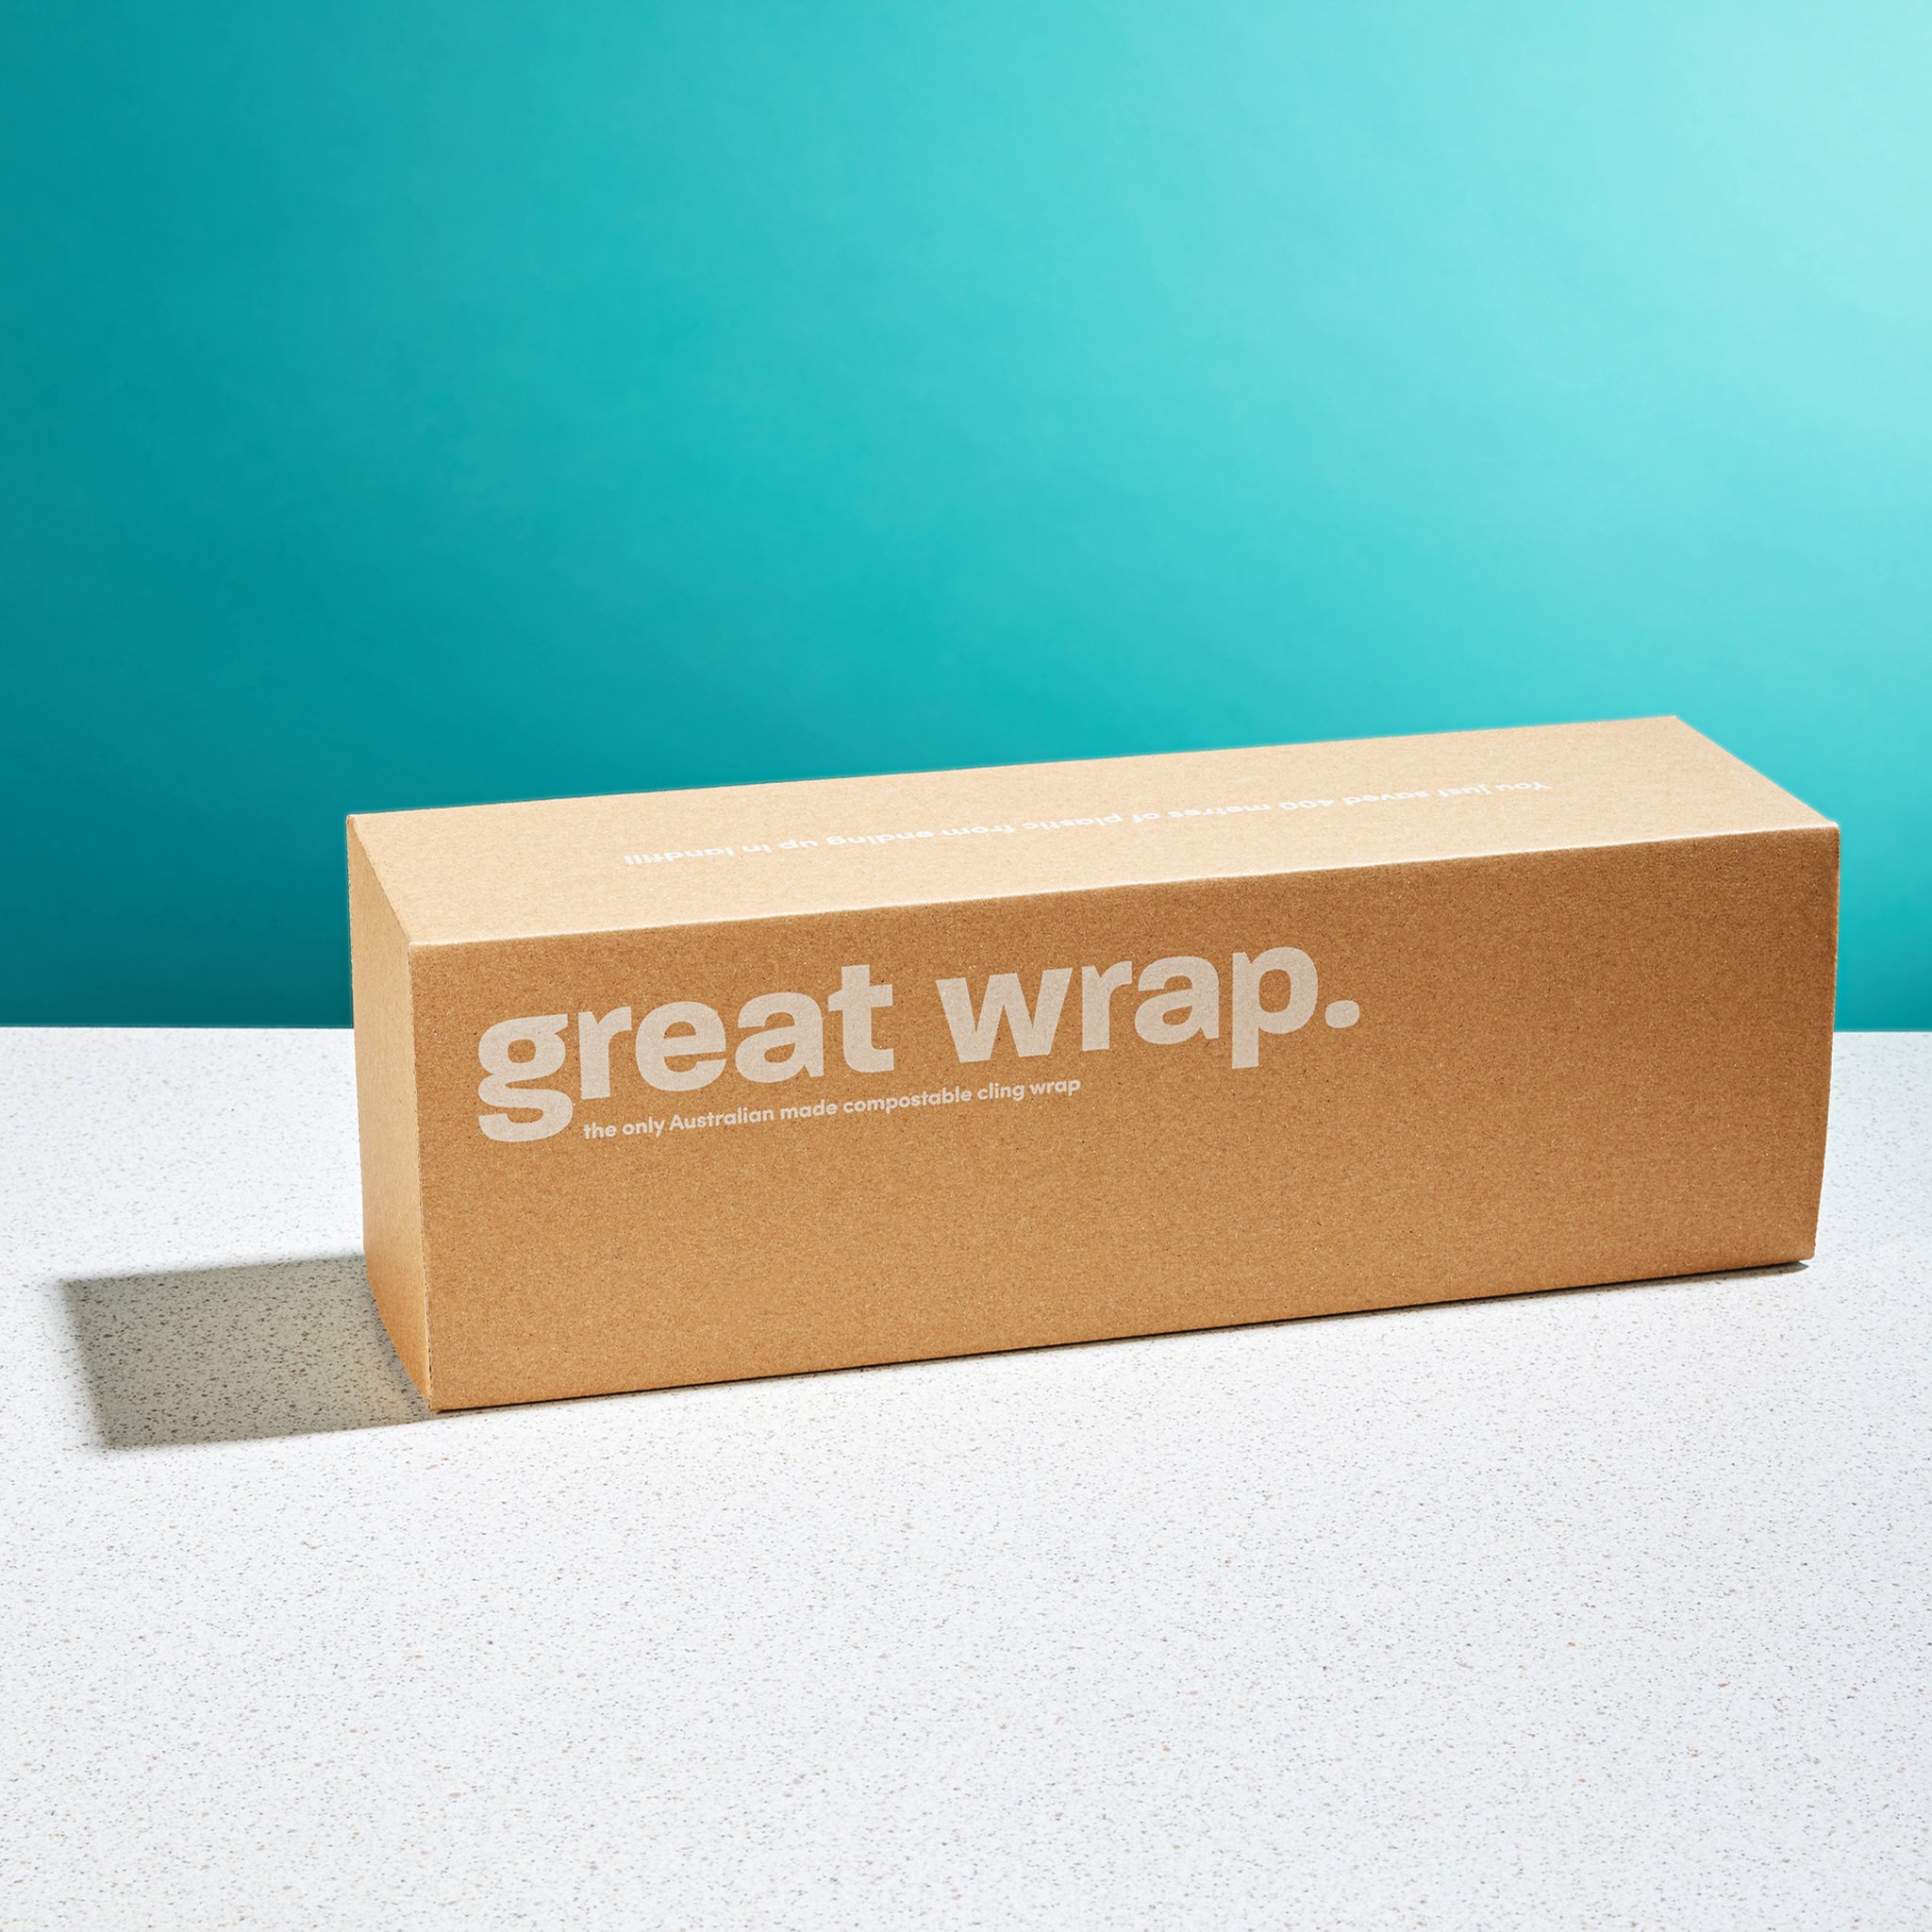 Compostic cling wrap is biodegradable, just as good as plastic